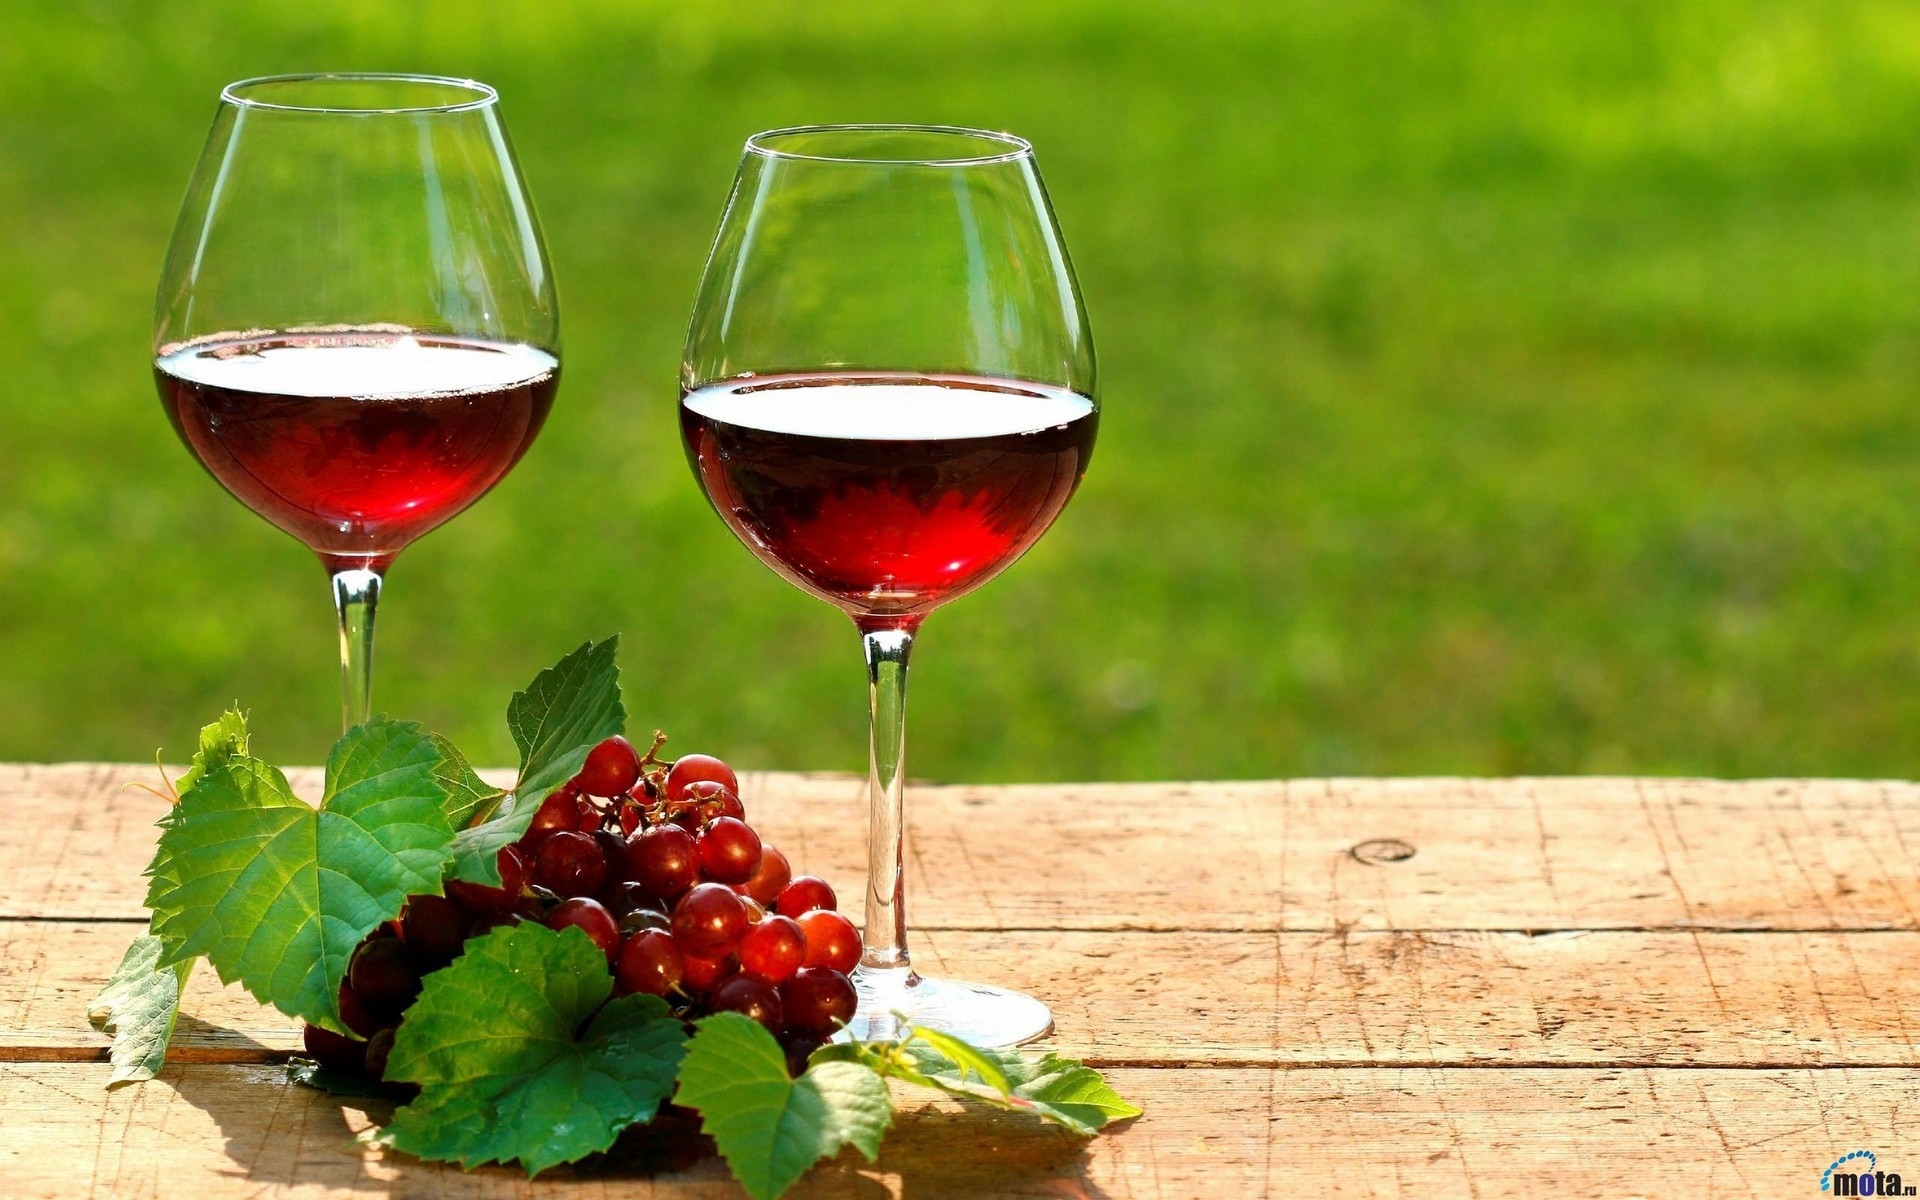 General 1920x1200 wine drink alcohol grapes food leaves drinking glass